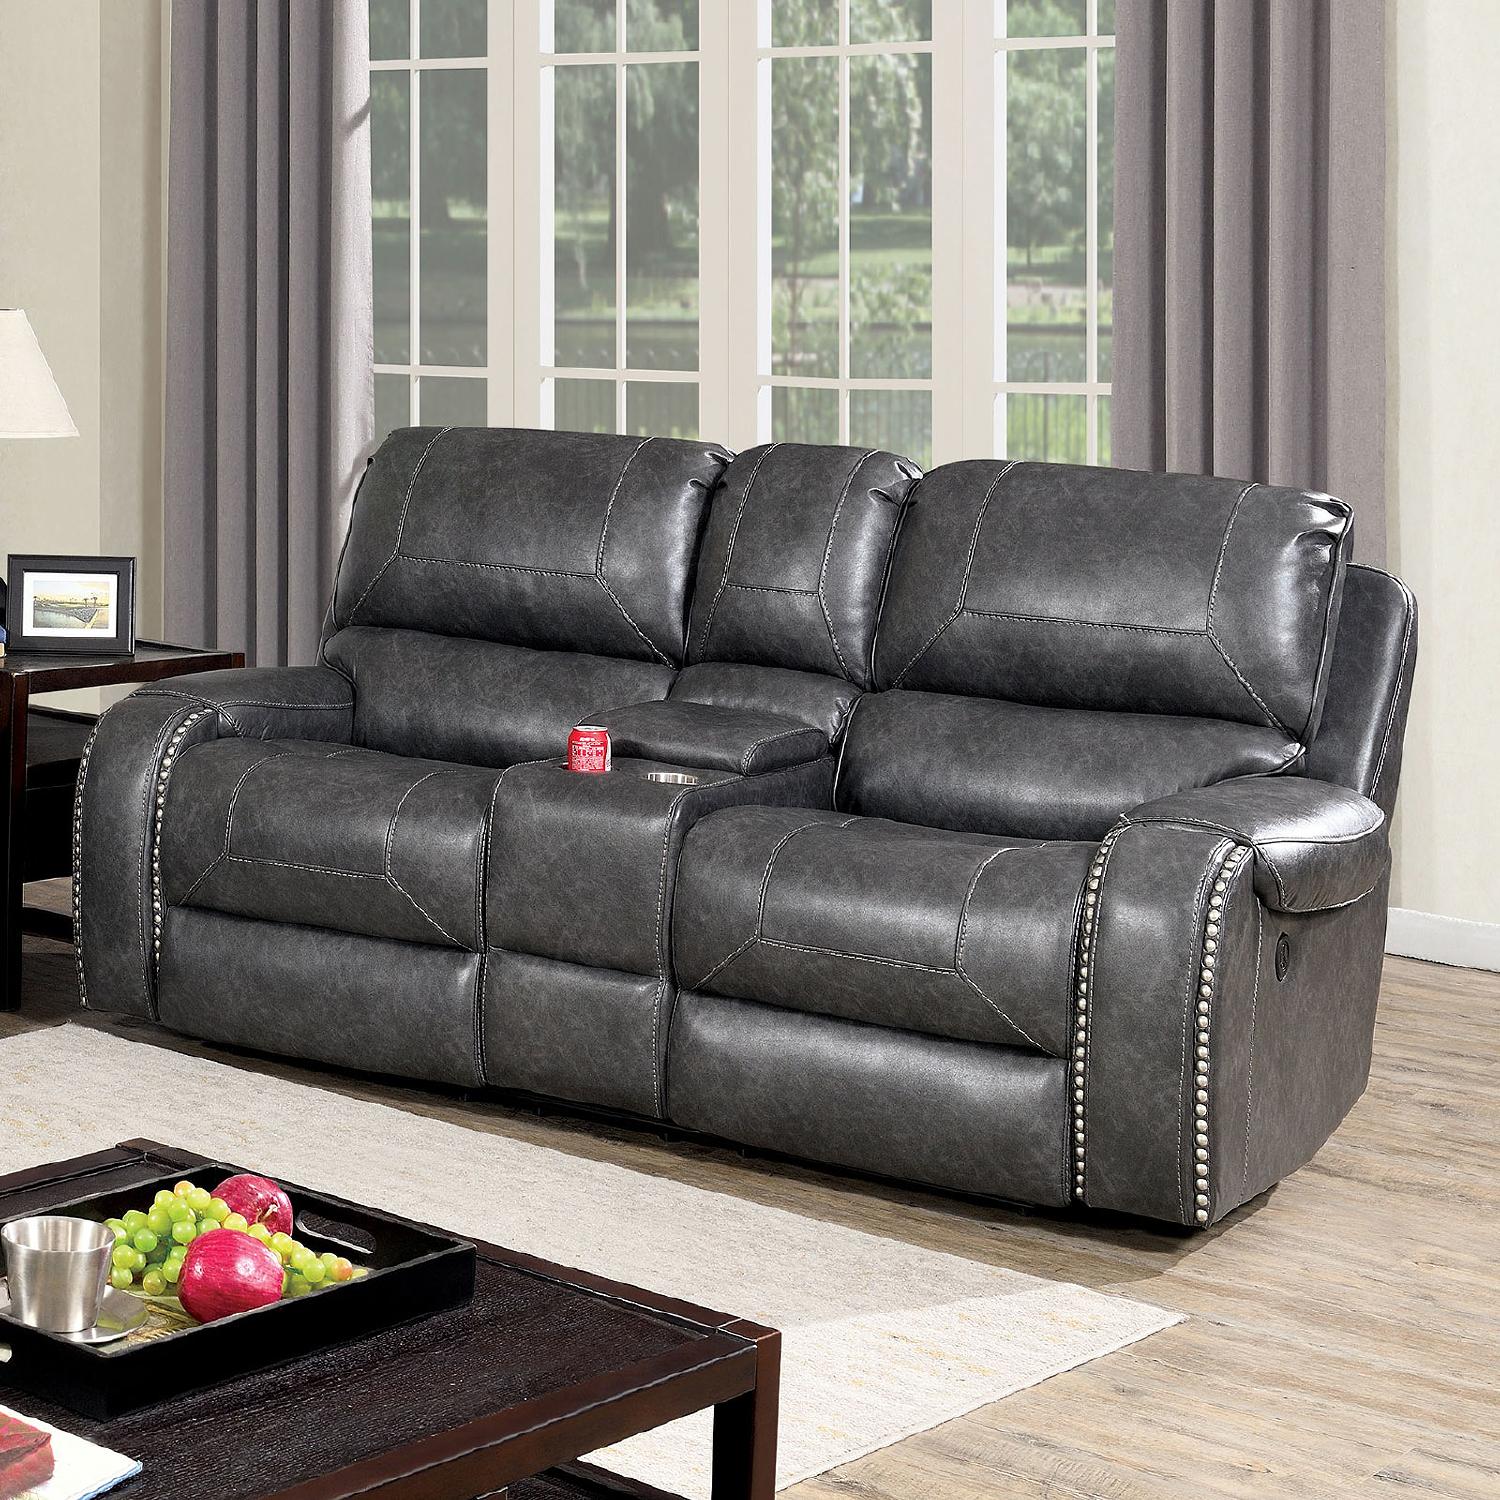 Transitional Power loveseat CM6950GY-LV-PM Walter CM6950GY-LV-PM in Gray Leatherette